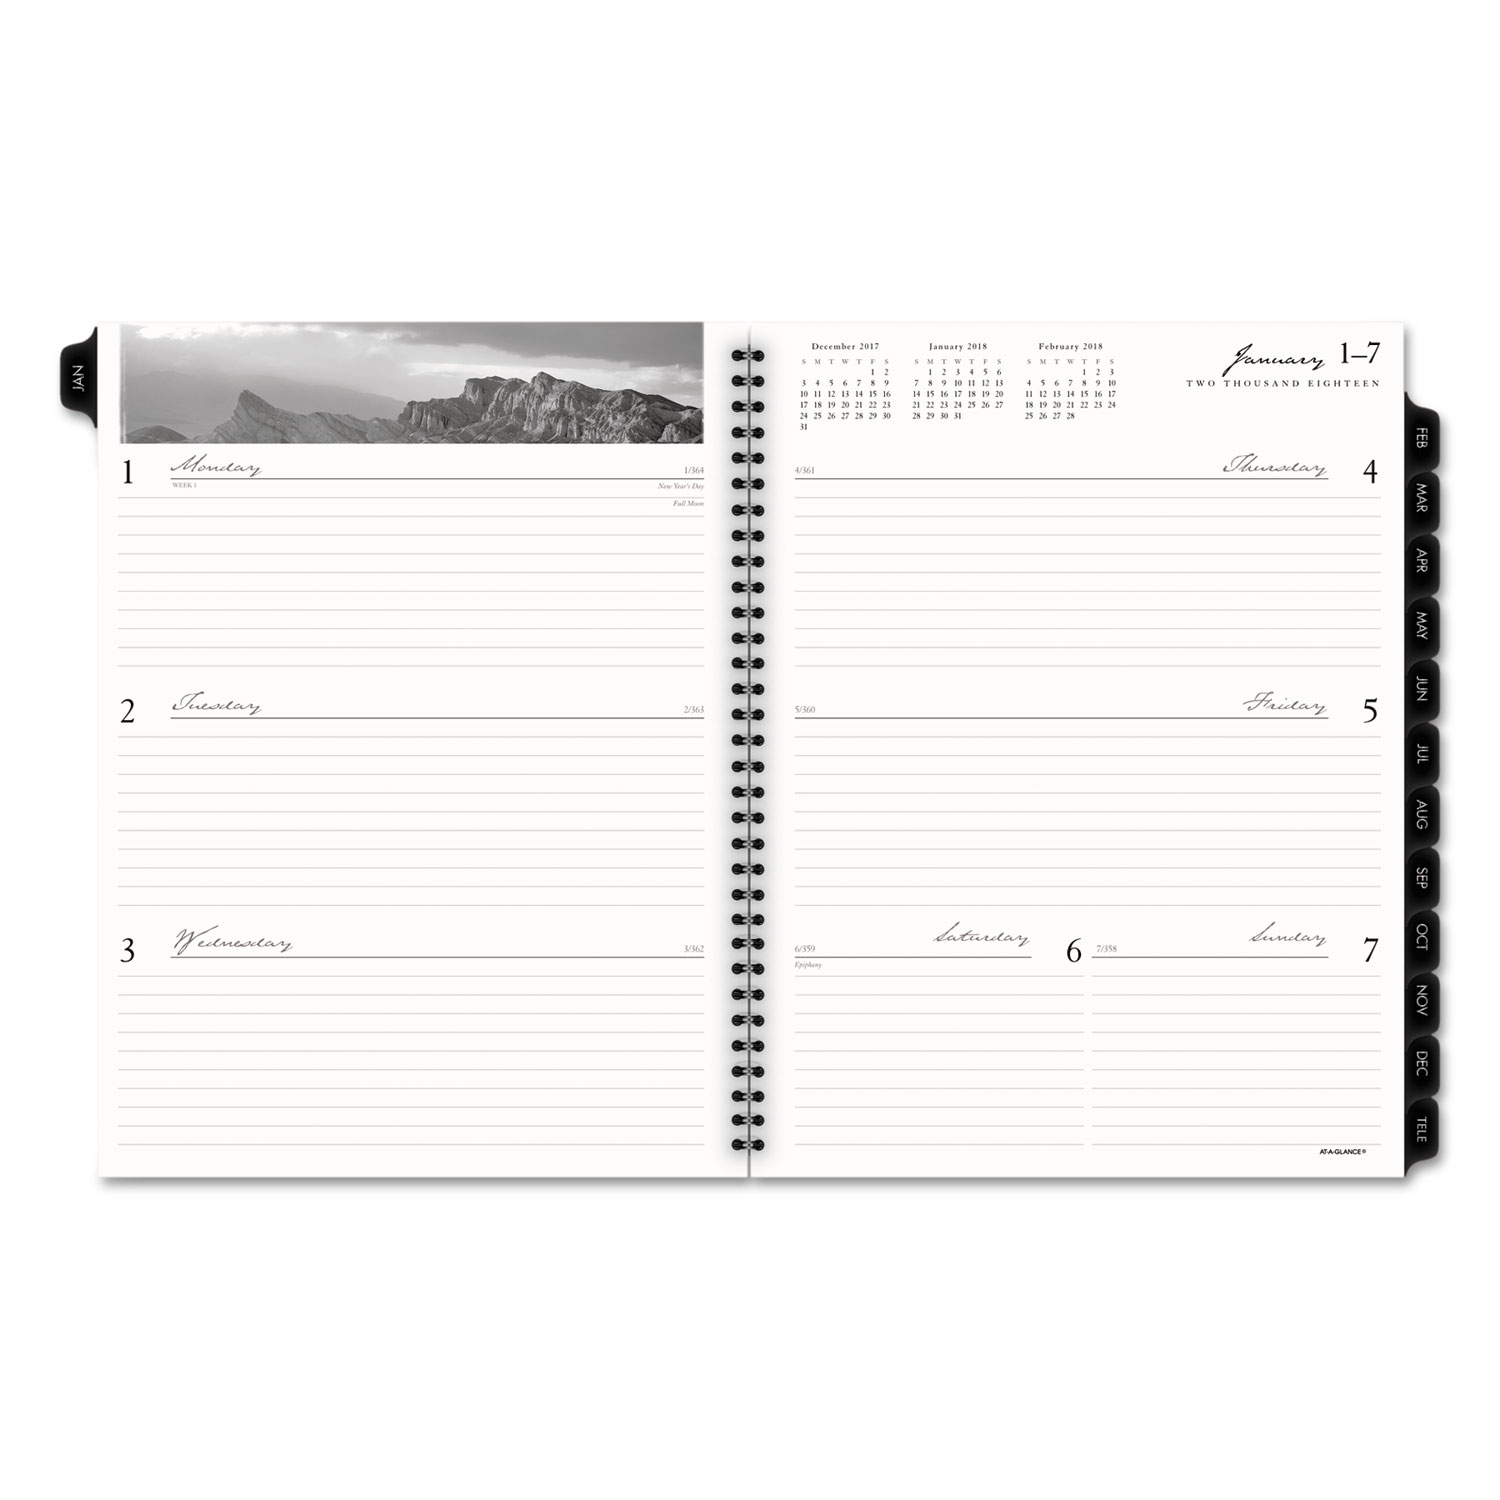 Executive Fashion Weekly/Monthly Planner Refill, 8 1/4 x 10 7/8, 2018